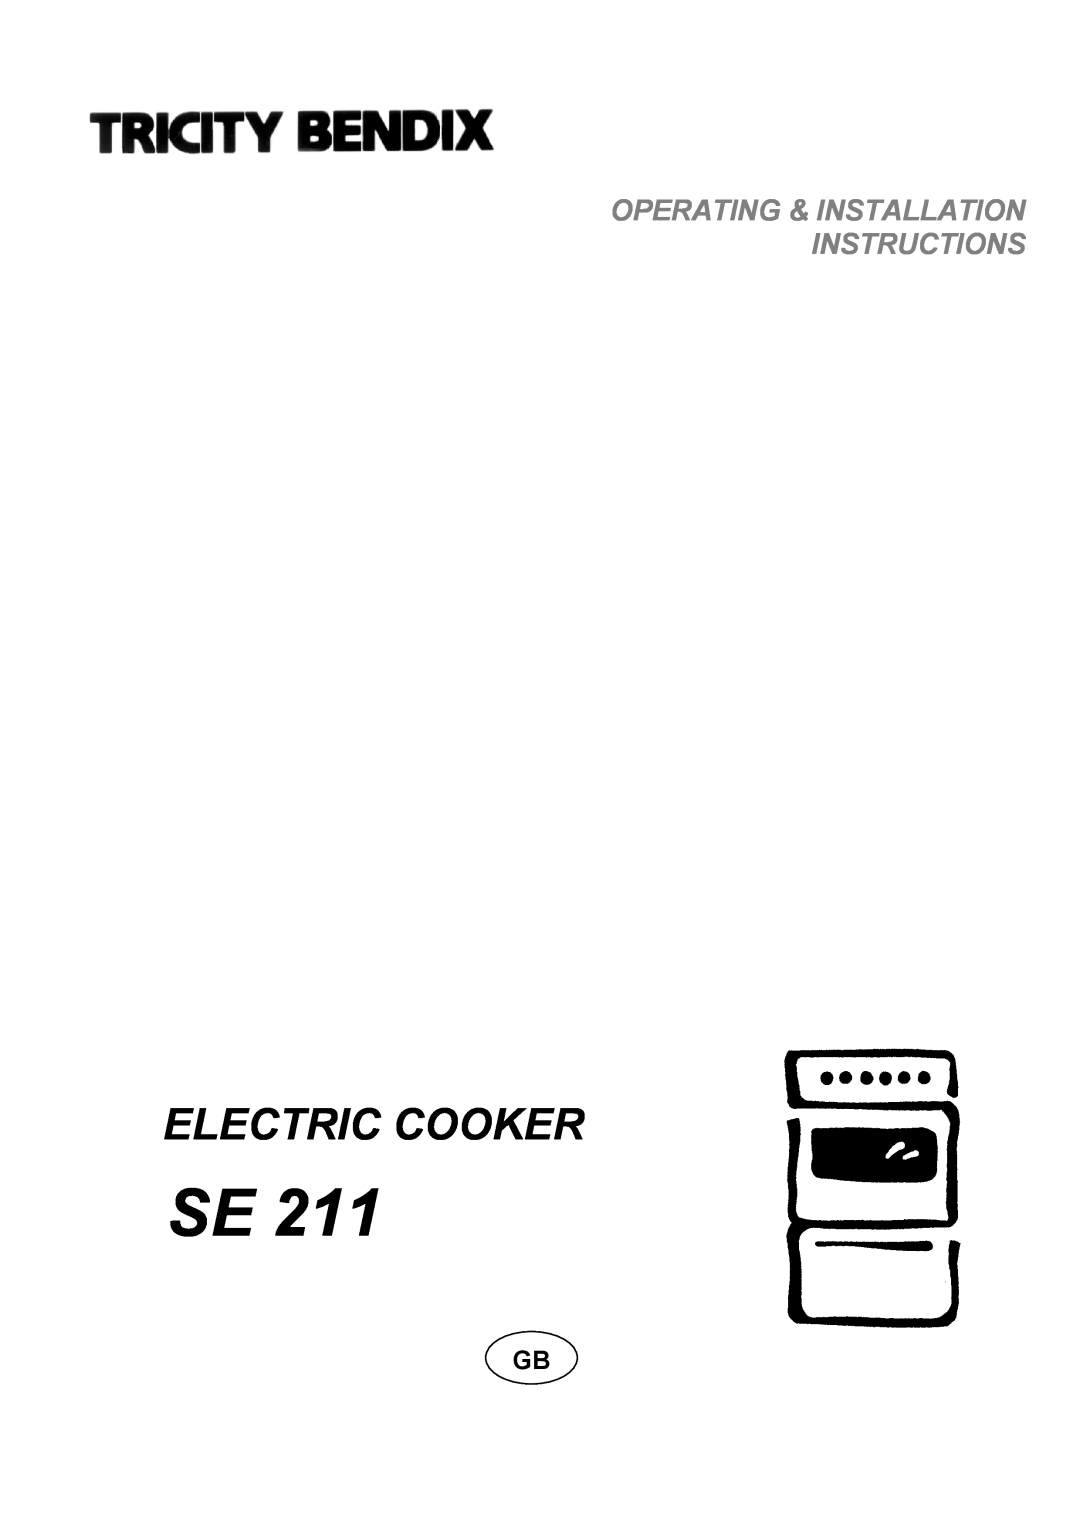 Tricity Bendix SE 211 installation instructions Electric Cooker, Operating & Installation Instructions 